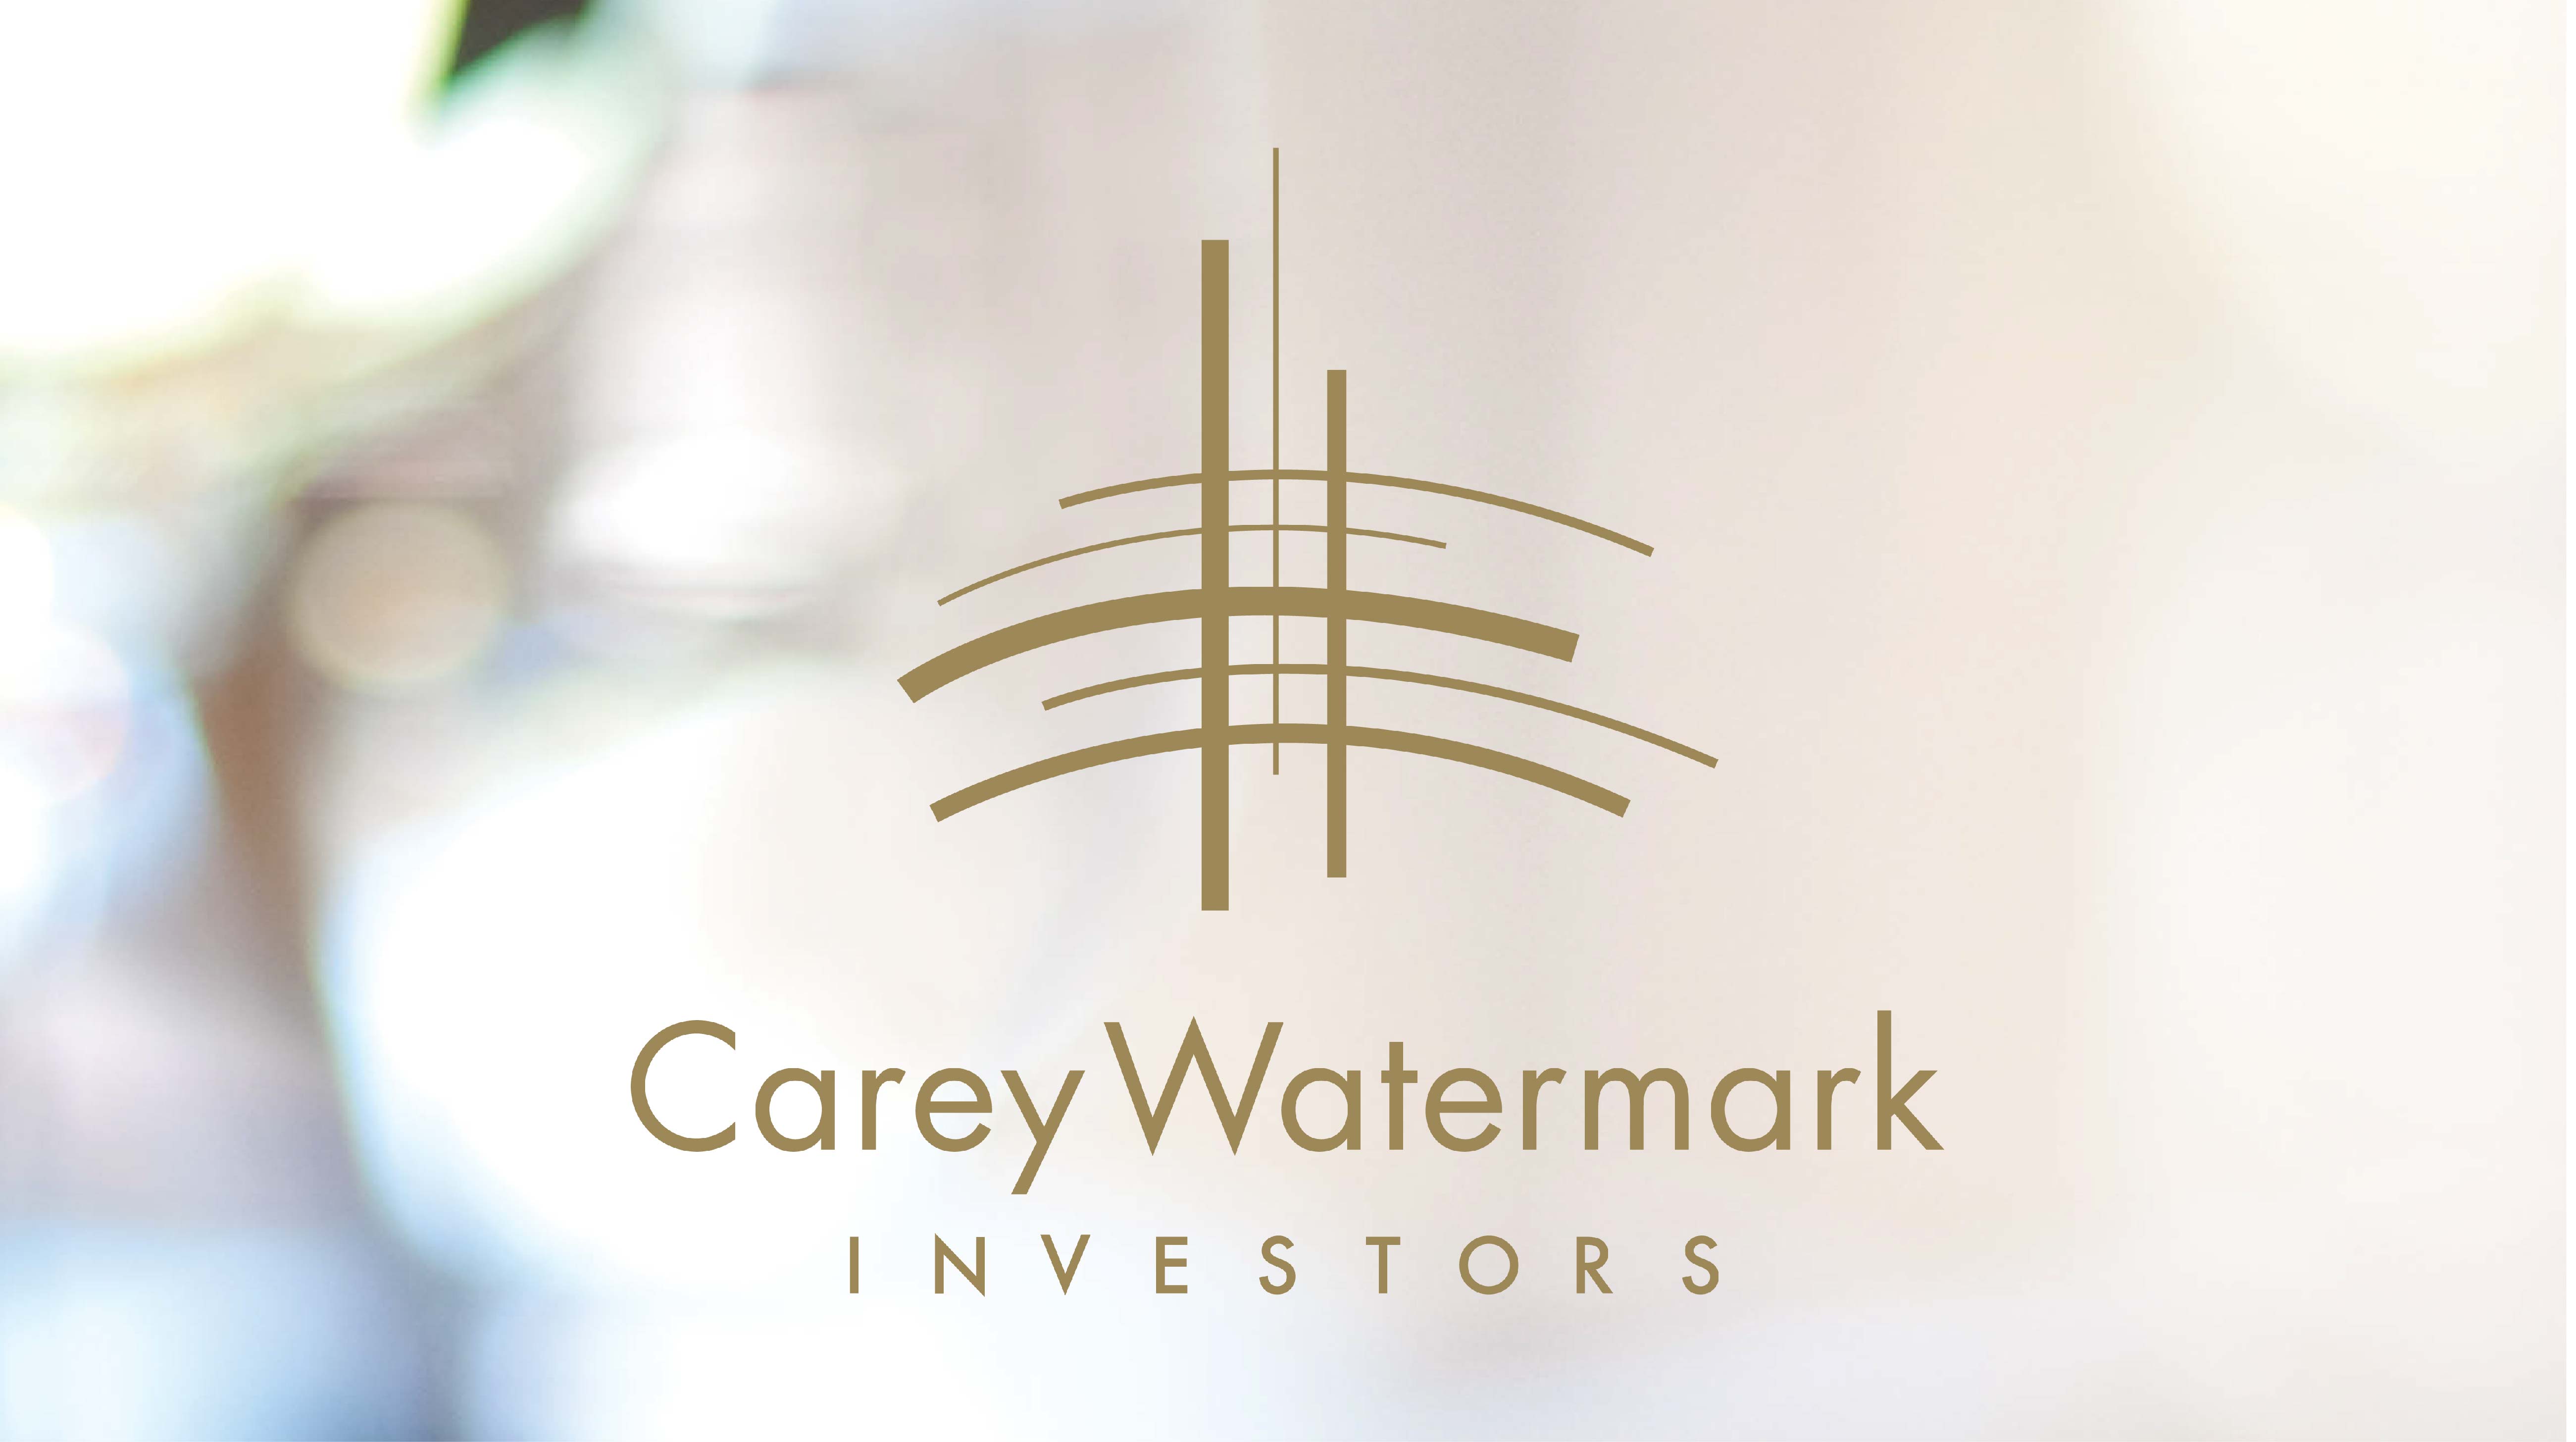 carey watermark logo on a blurry colorful background